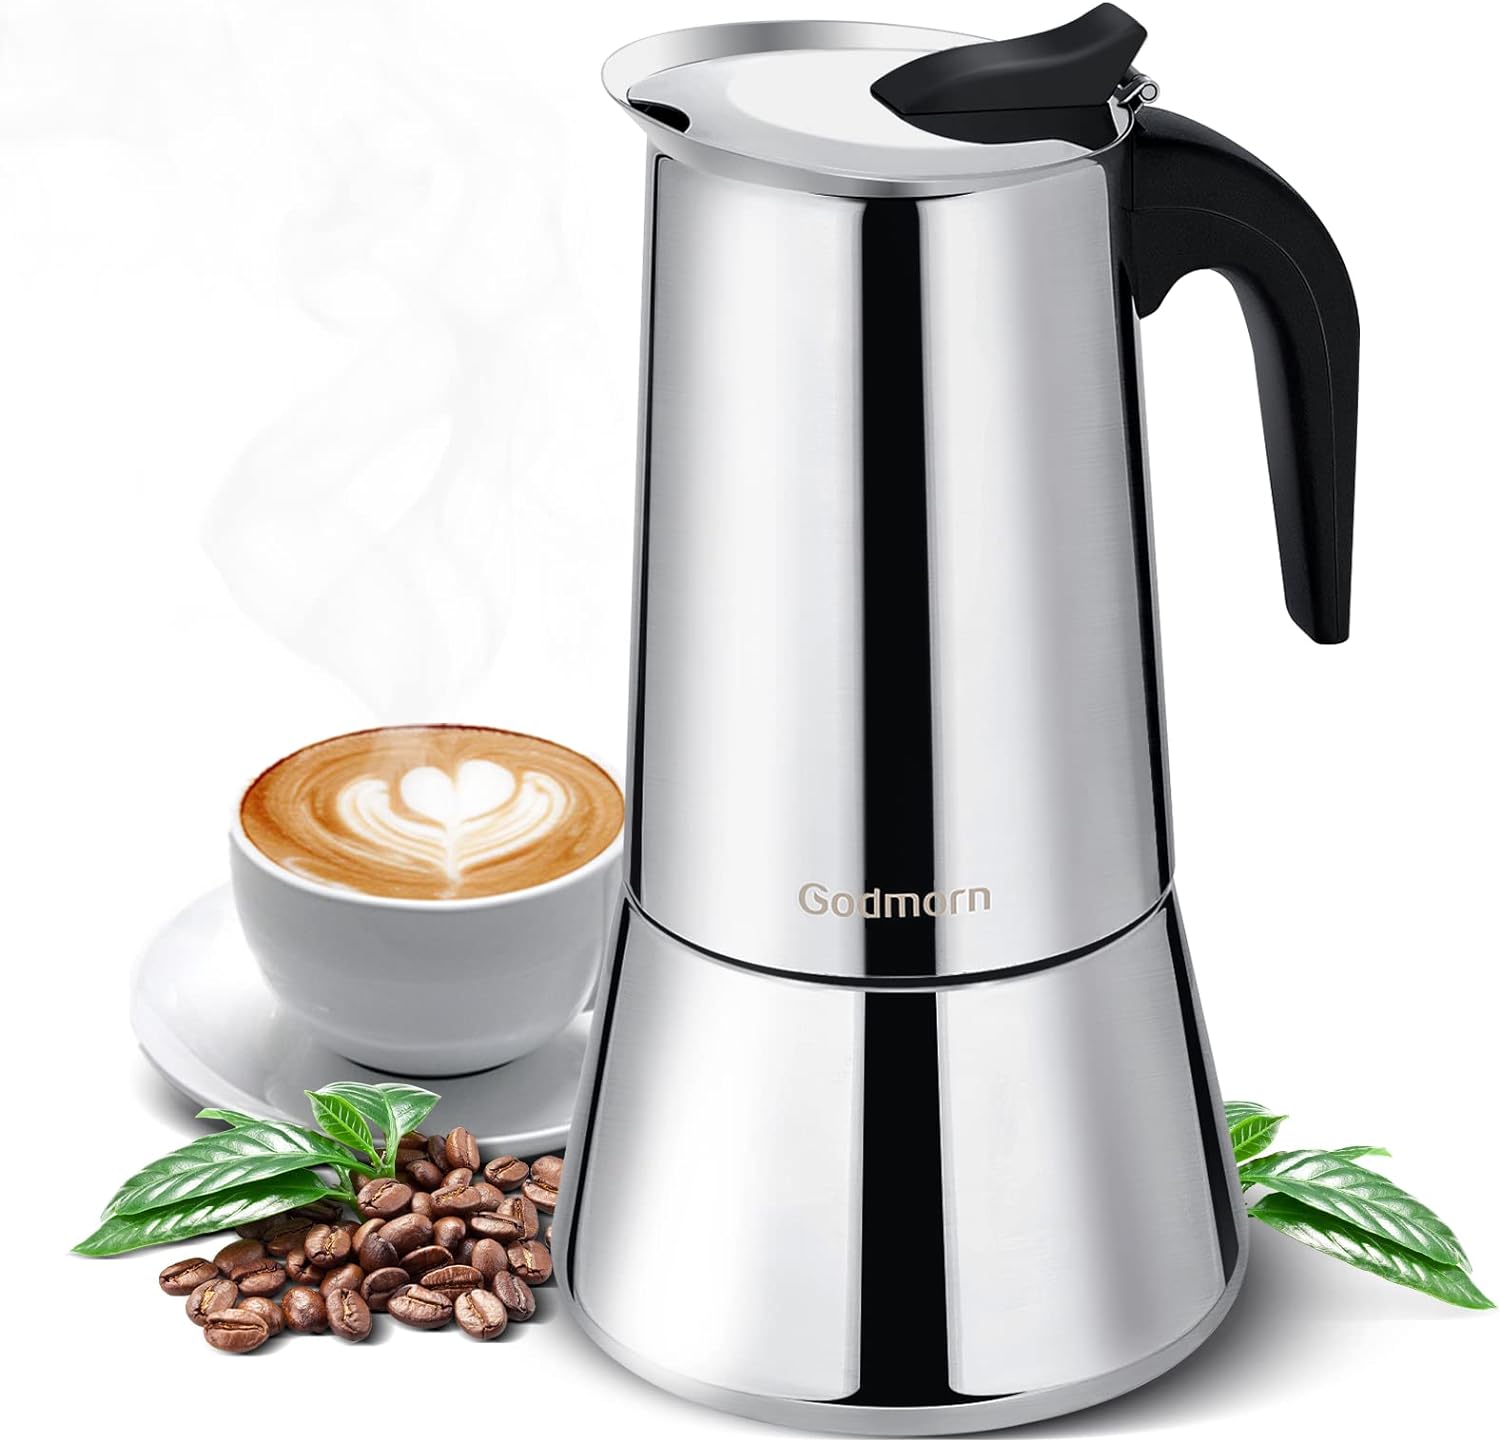 Godmorn Stovetop Espresso Maker, Moka Pot, Percolator Italian Coffee Maker, 600ml/20oz/12 cup (espresso cup=50ml), Classic Cafe Maker, stainless steel, suitable for induction cookers